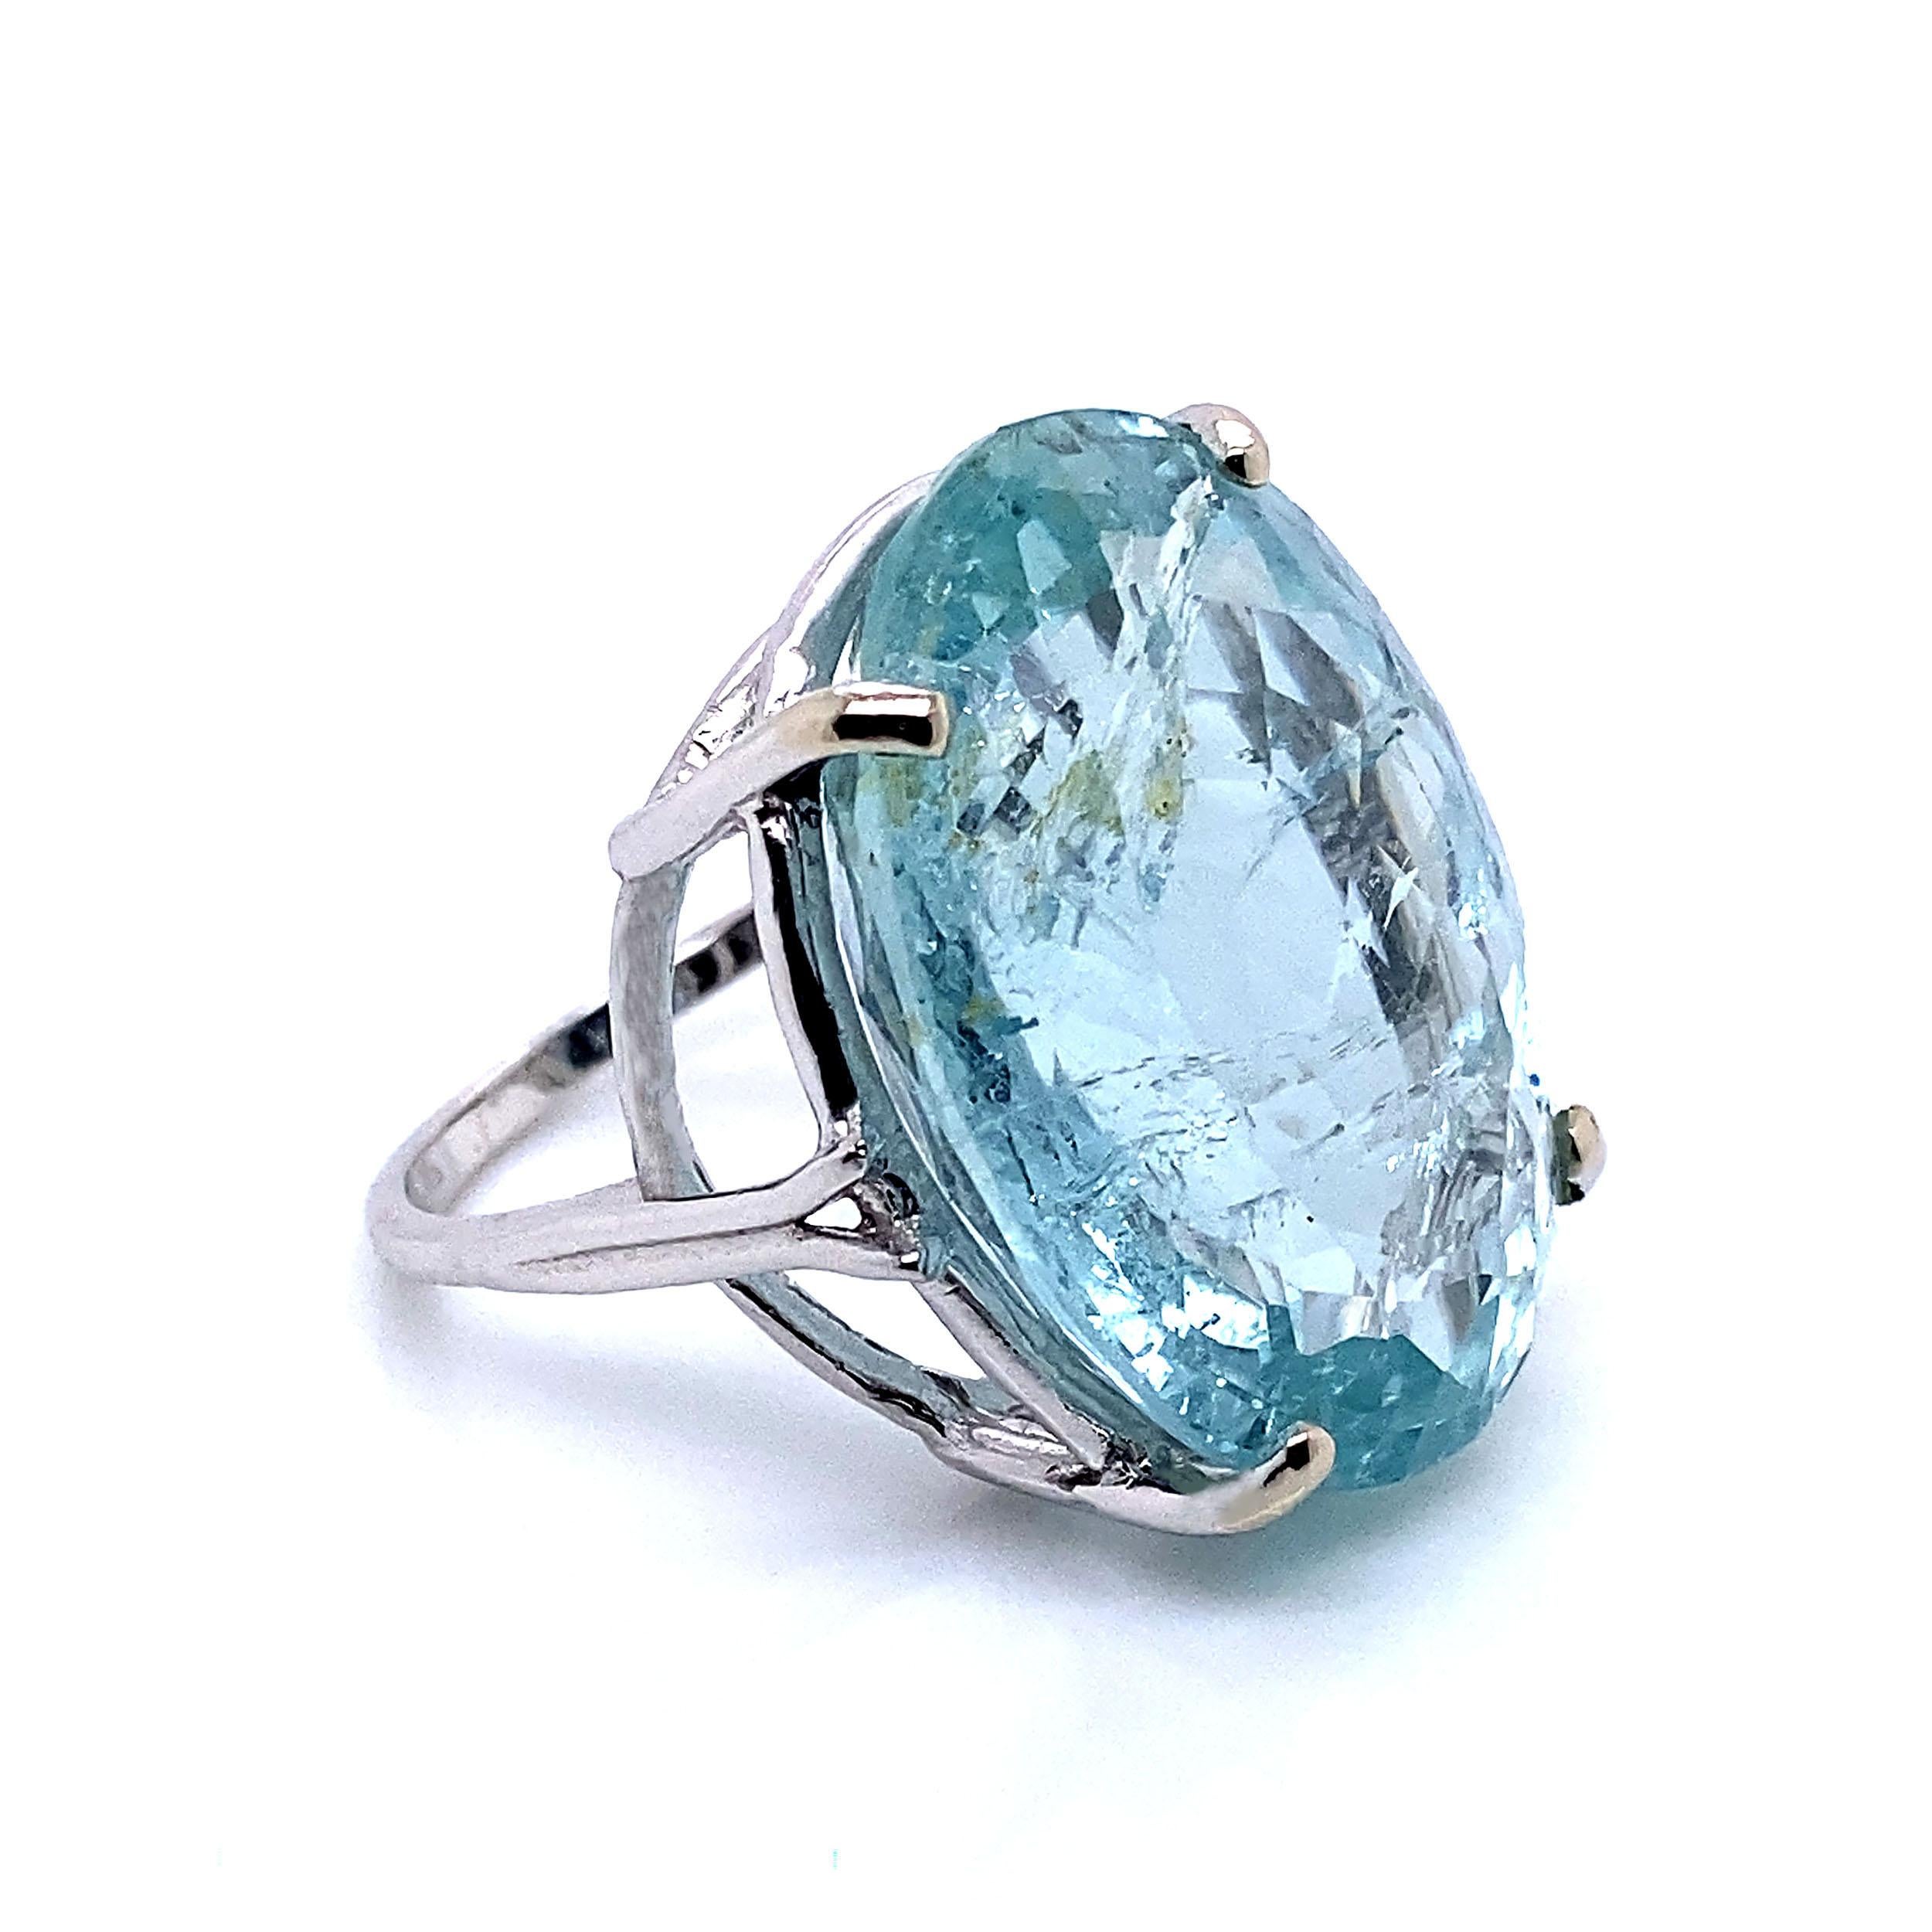 Aquamarine lovers, March Babies, here's your ring!  37 carats of sparkling Aquamarine.  This huge baby is knuckle to knuckle. Oval is always a favorite shape because is pleasing on everyone's hand.  This sparkler is set in 14K White Gold to